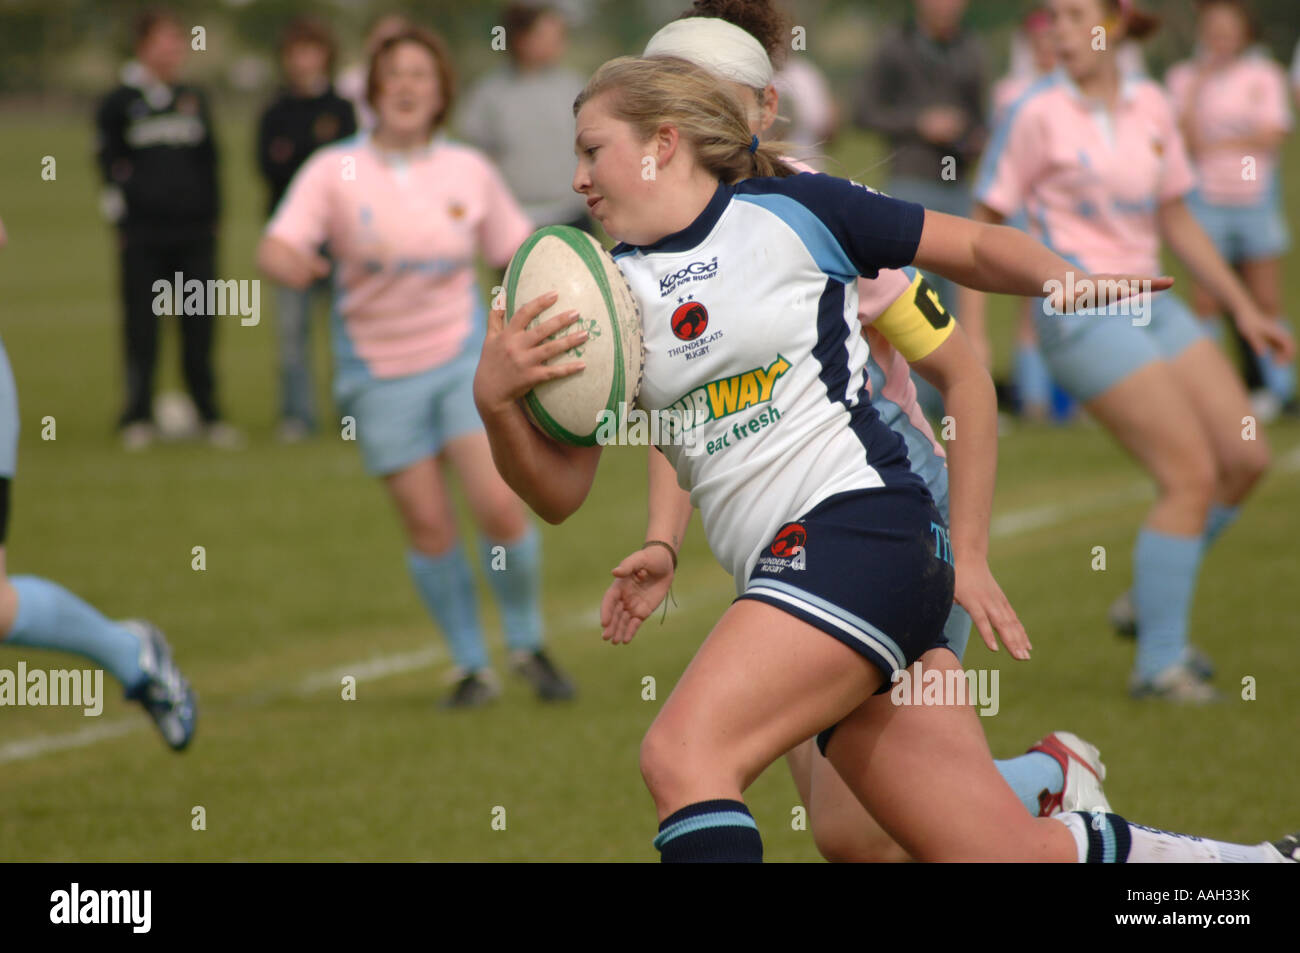 women playing rugby aberystwyth university - a woman in kit sponsored by Subway sandwich bar running with ball in her hands UK Stock Photo